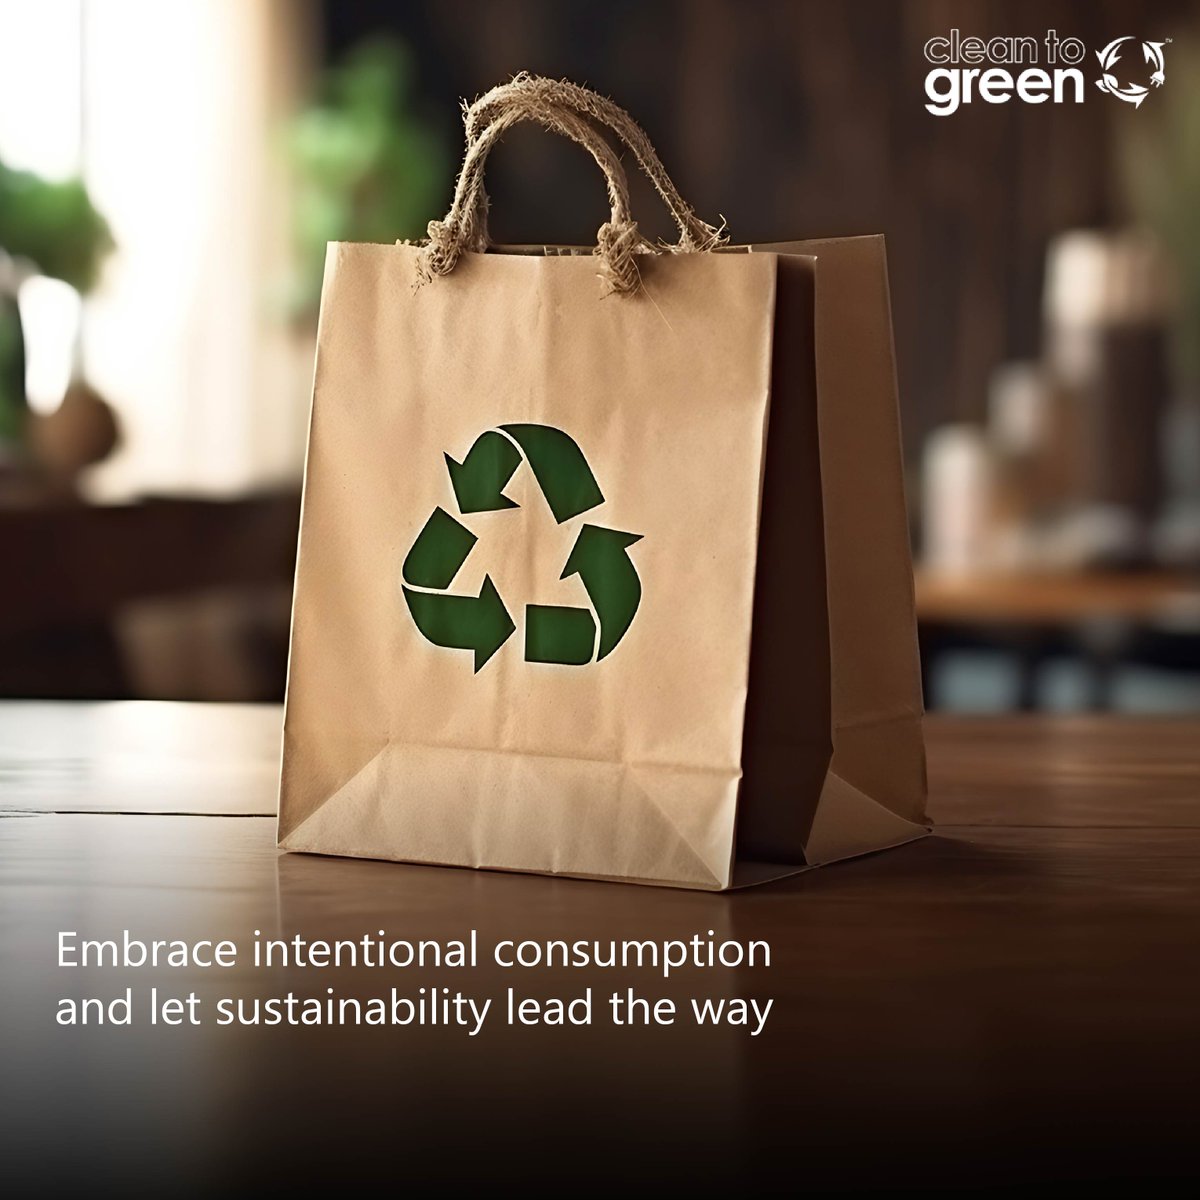 Discover simple ways to reduce your carbon footprint and foster sustainability effortlessly. Small habits lead to a greener future. Make a difference with each eco-conscious choice. 

#SustainableLiving #CarbonFootprintReduction